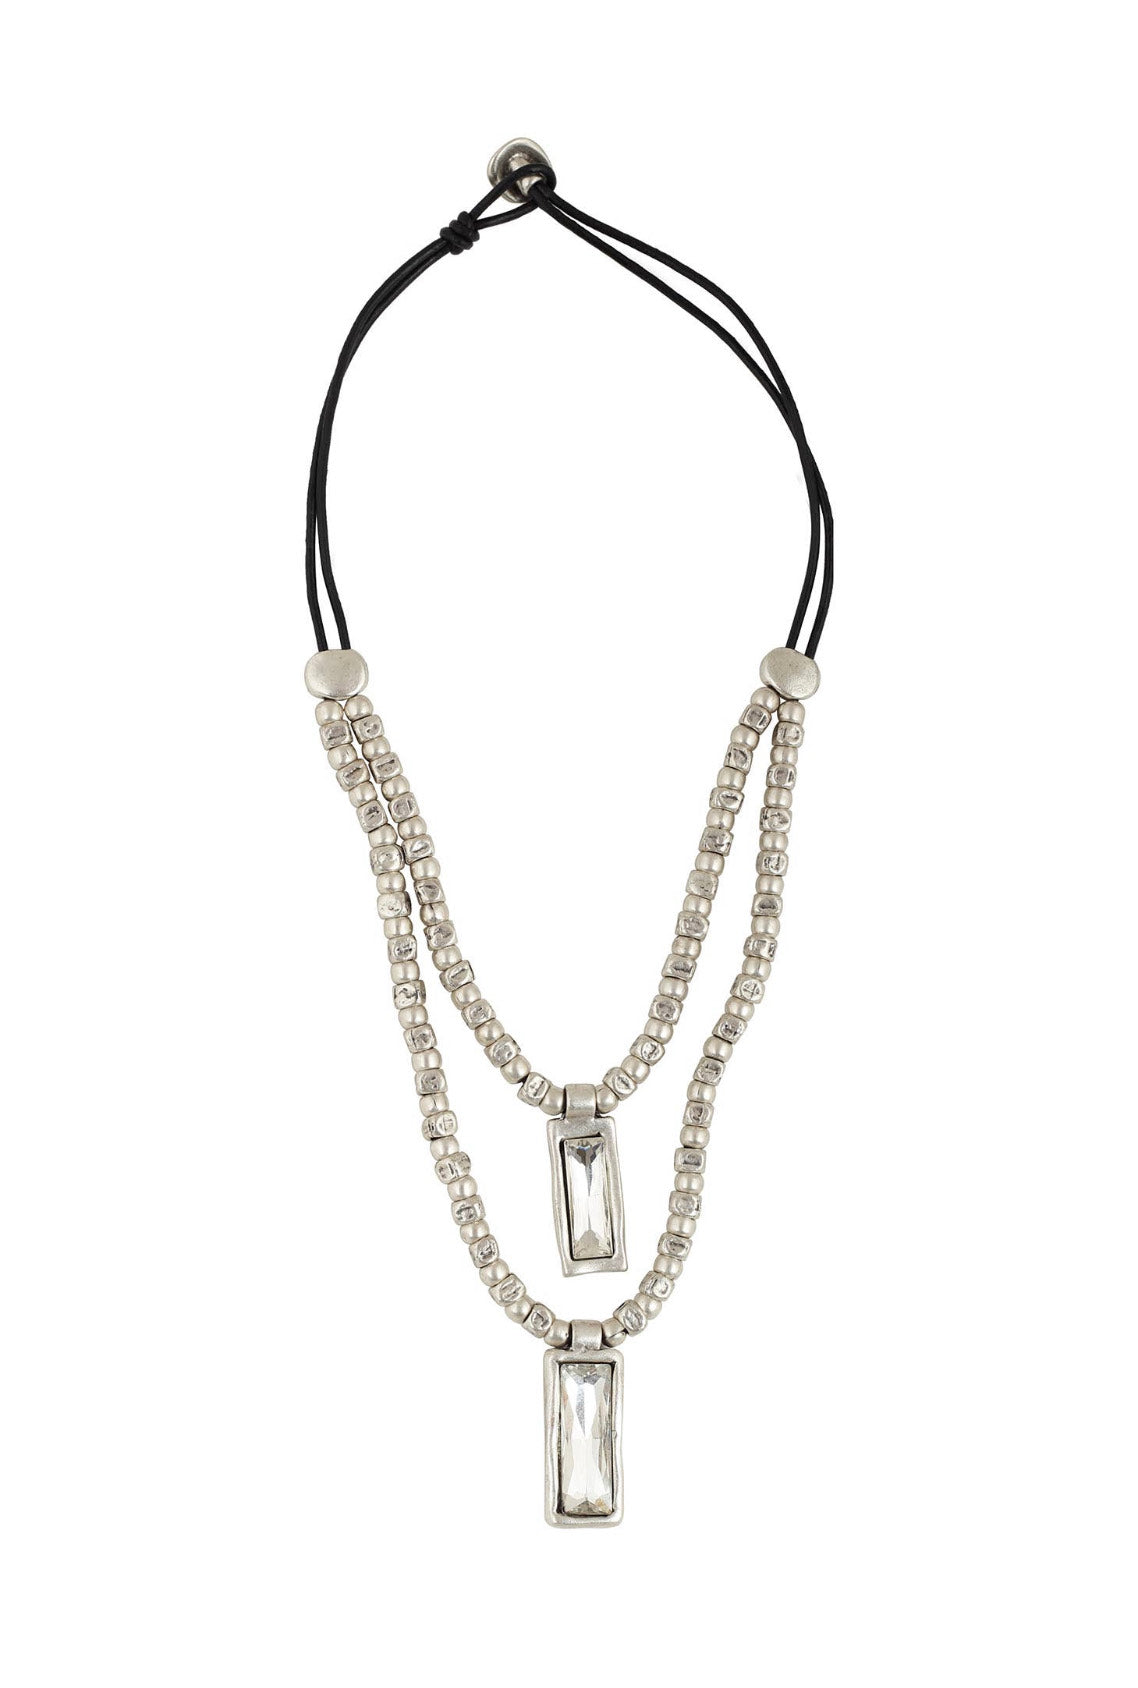 CHANOUR Sofistikat! Double Stranded and Crystal Necklace